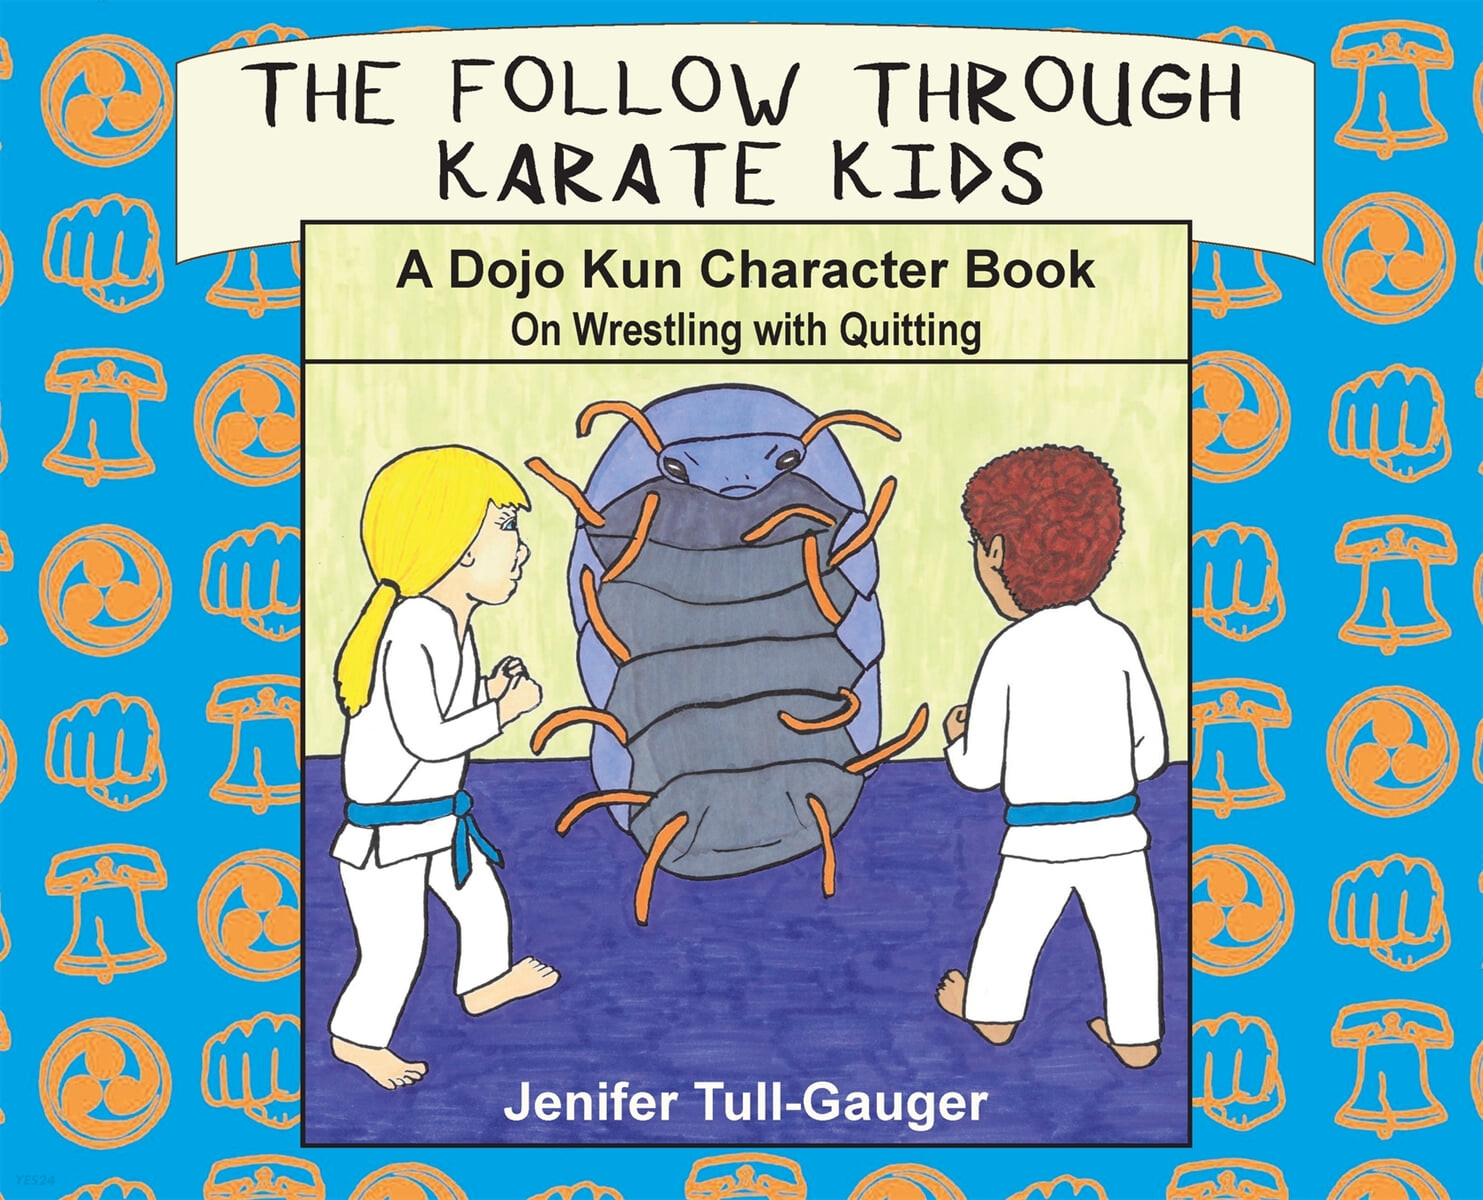 (The) Follow through karate kids : (a) Dojo Kun character book on wrestling with quitting 